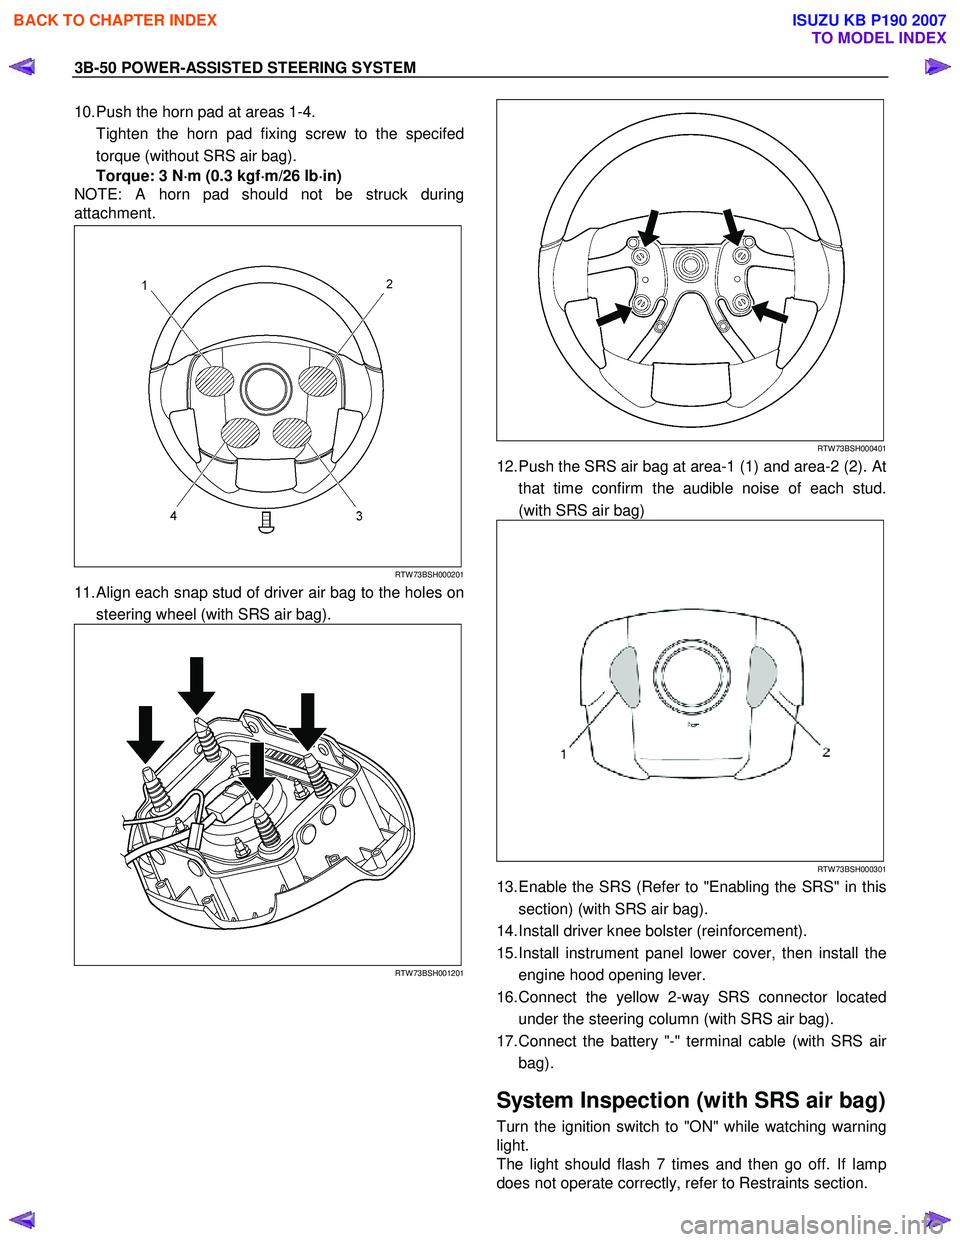 ISUZU KB P190 2007  Workshop Service Manual 3B-50 POWER-ASSISTED STEERING SYSTEM 
10. Push the horn pad at areas 1-4.  
  Tighten the horn pad fixing screw to the specifed torque (without SRS air bag).  
Torque: 3 N ⋅
⋅⋅ 
⋅
m (0.3 kgf �